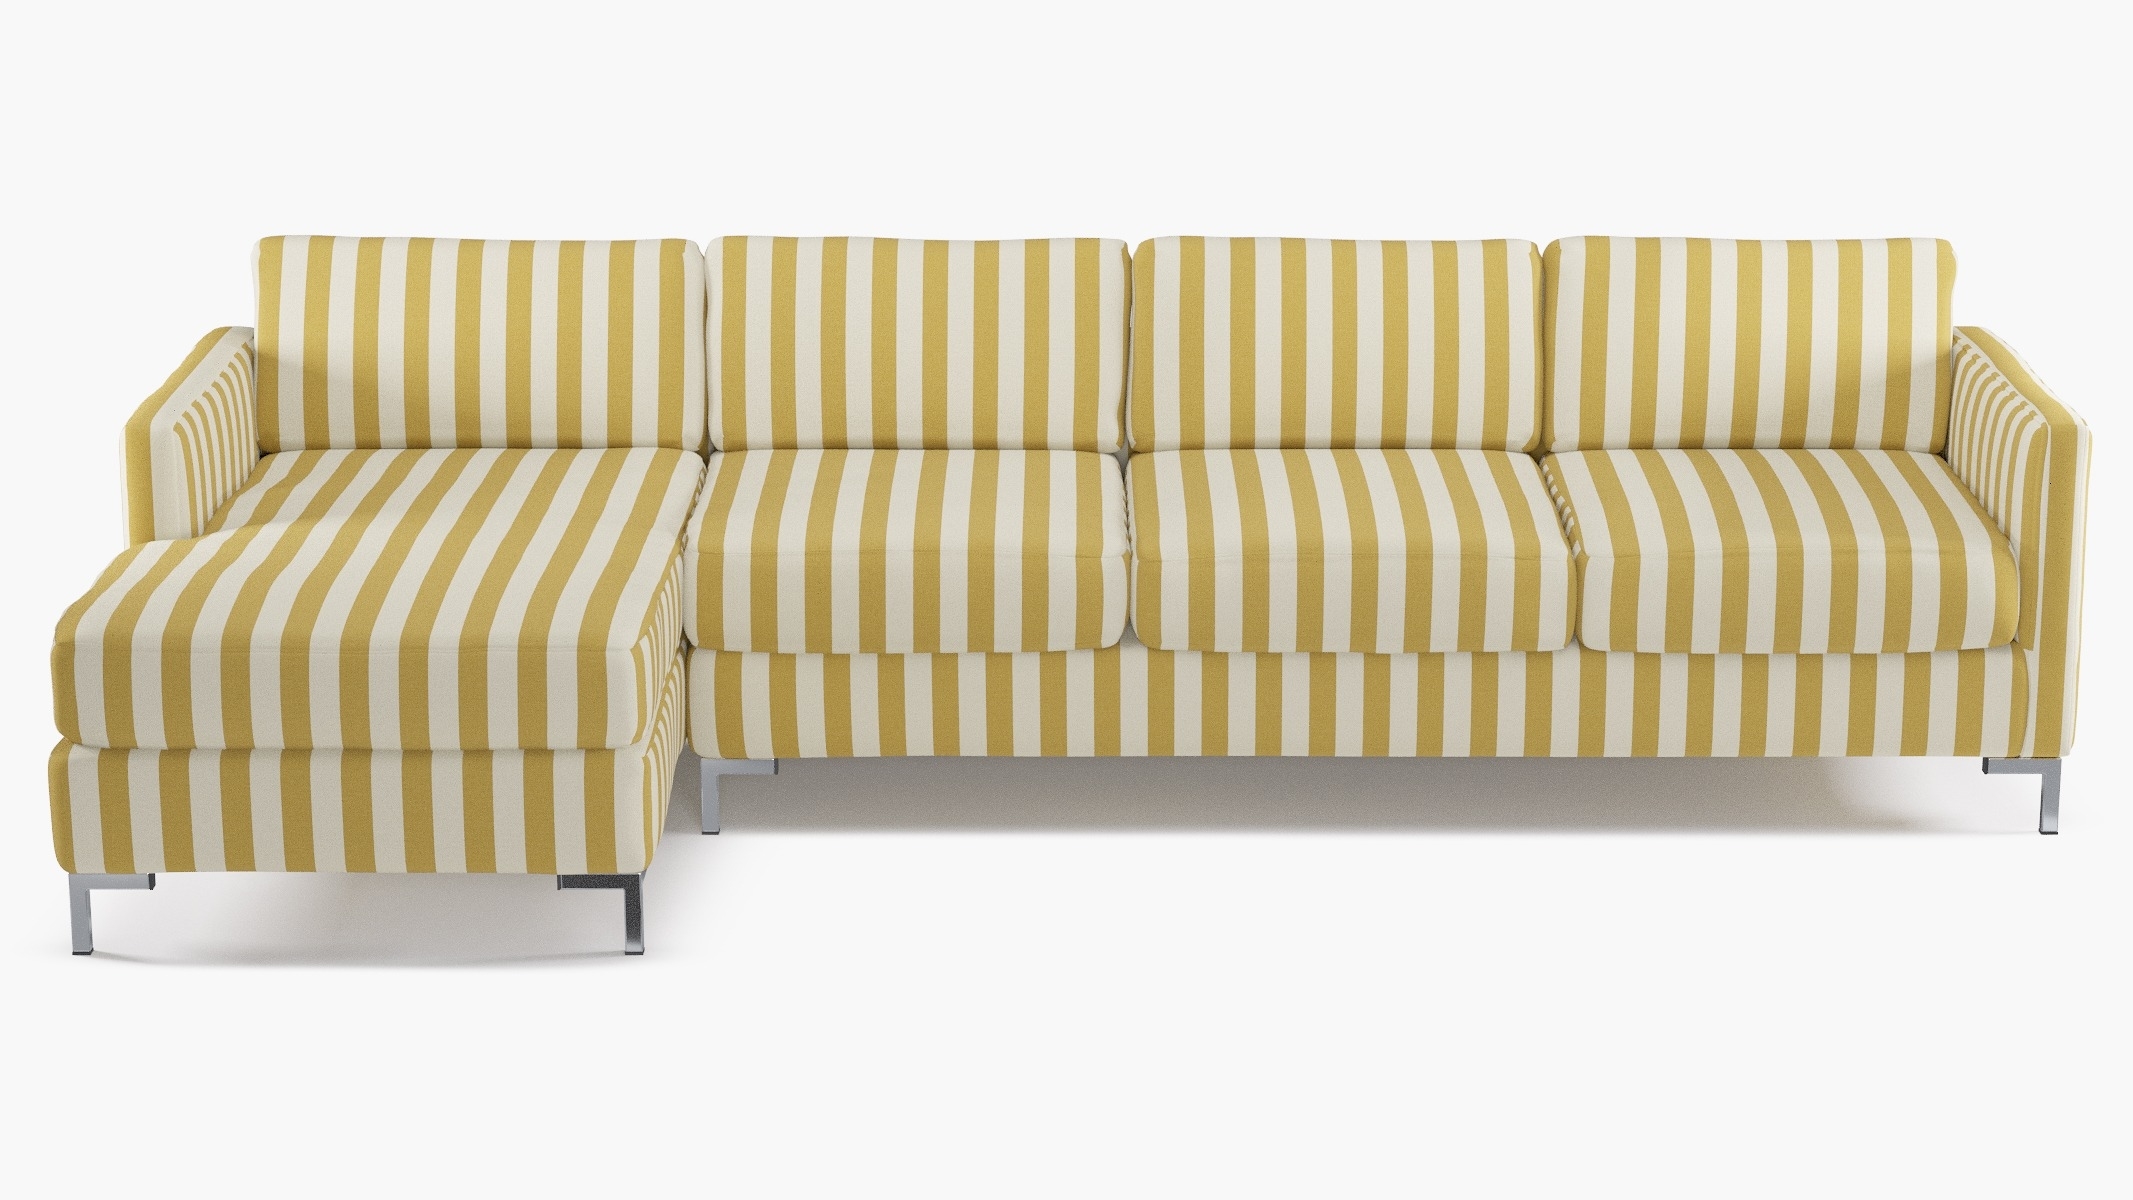 A yellow and white striped sectional